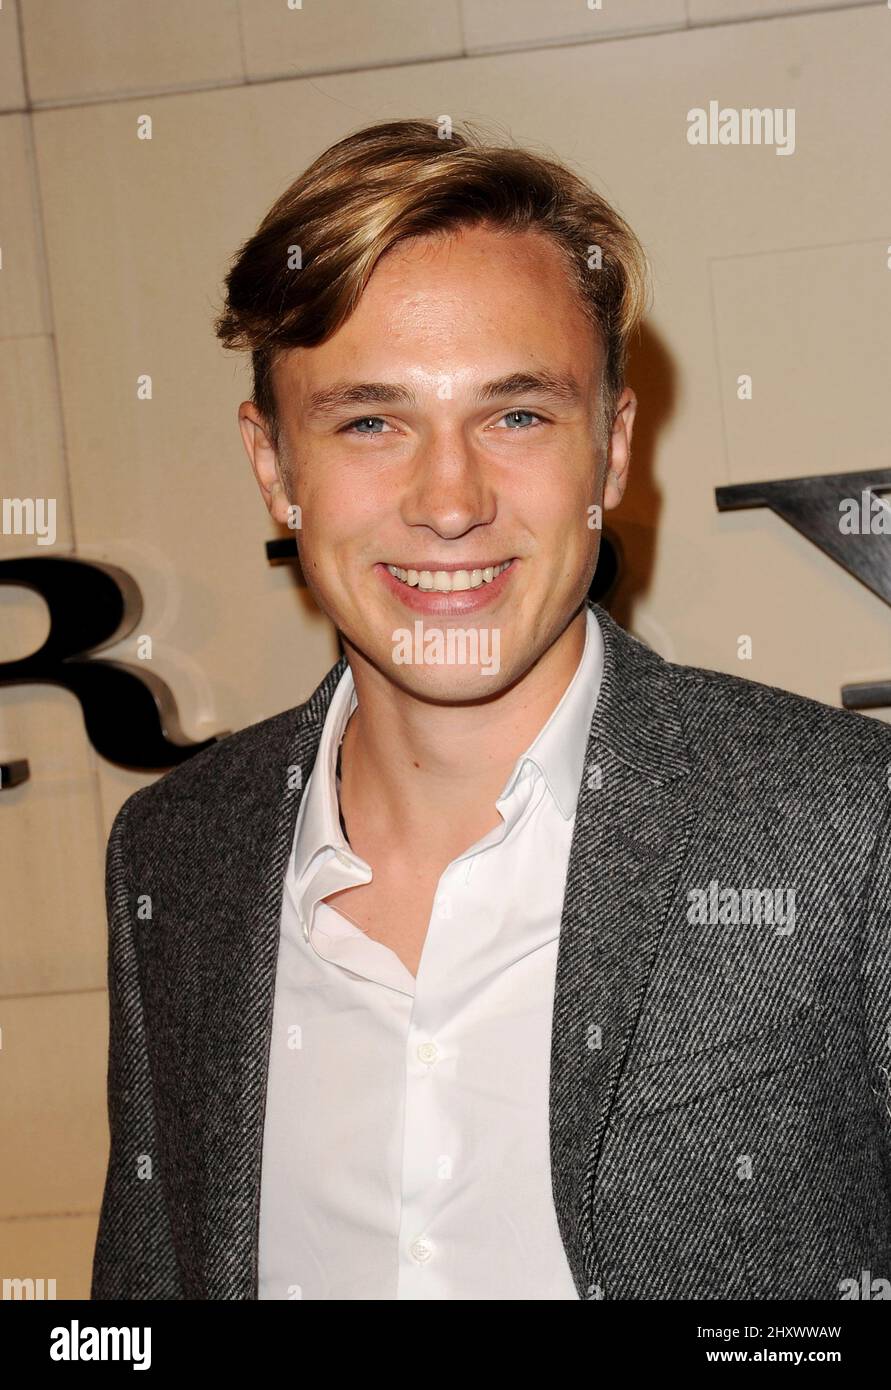 William Moseley during the 'Burberry Body' Burberry Fragrance Launch Party held at Burberry, California Stock Photo